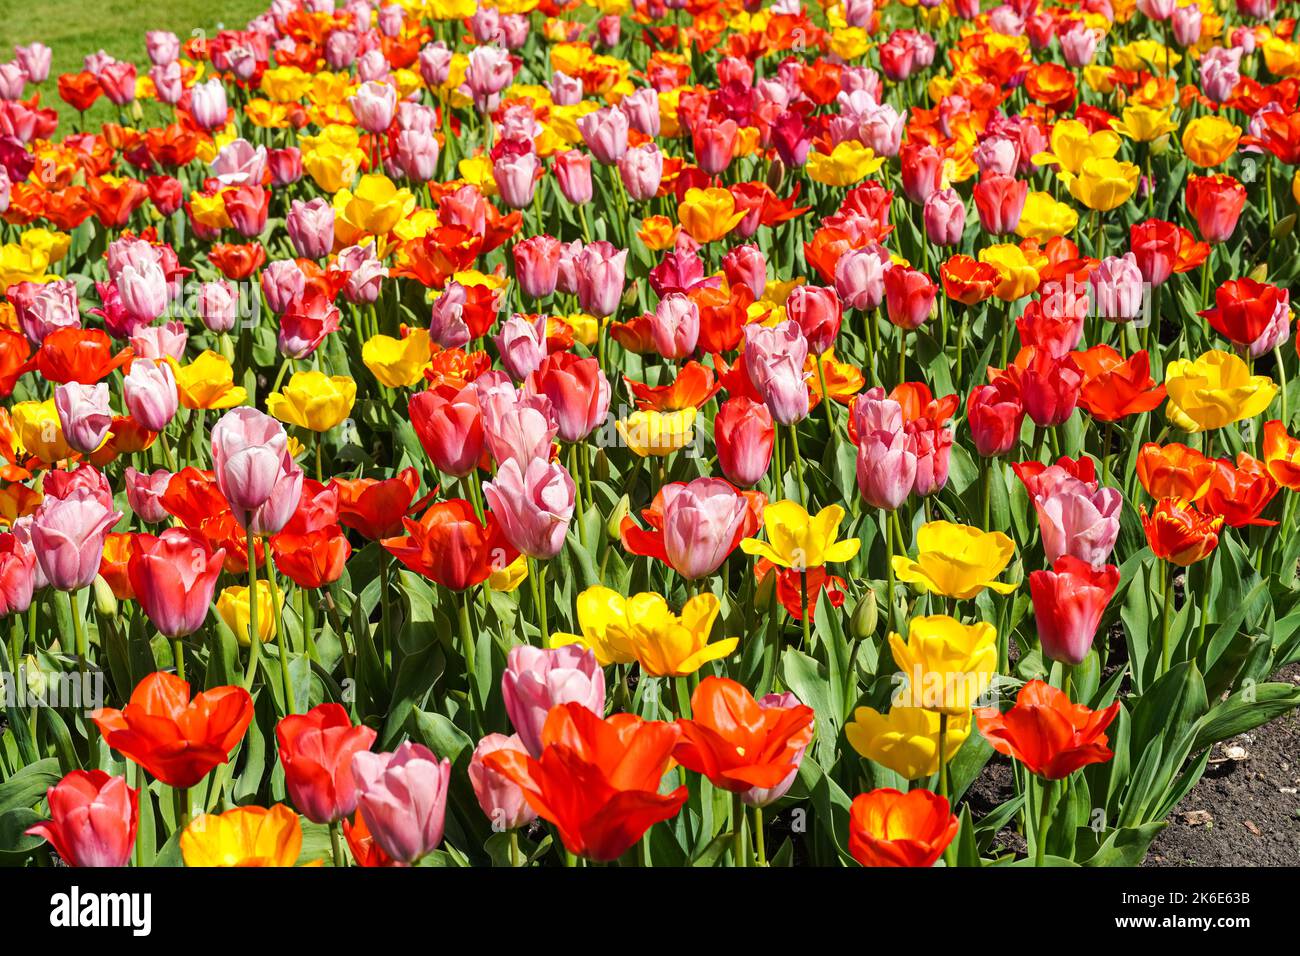 Pink tulips, red tulips and yellow tulips growing on a flowerbed Stock Photo